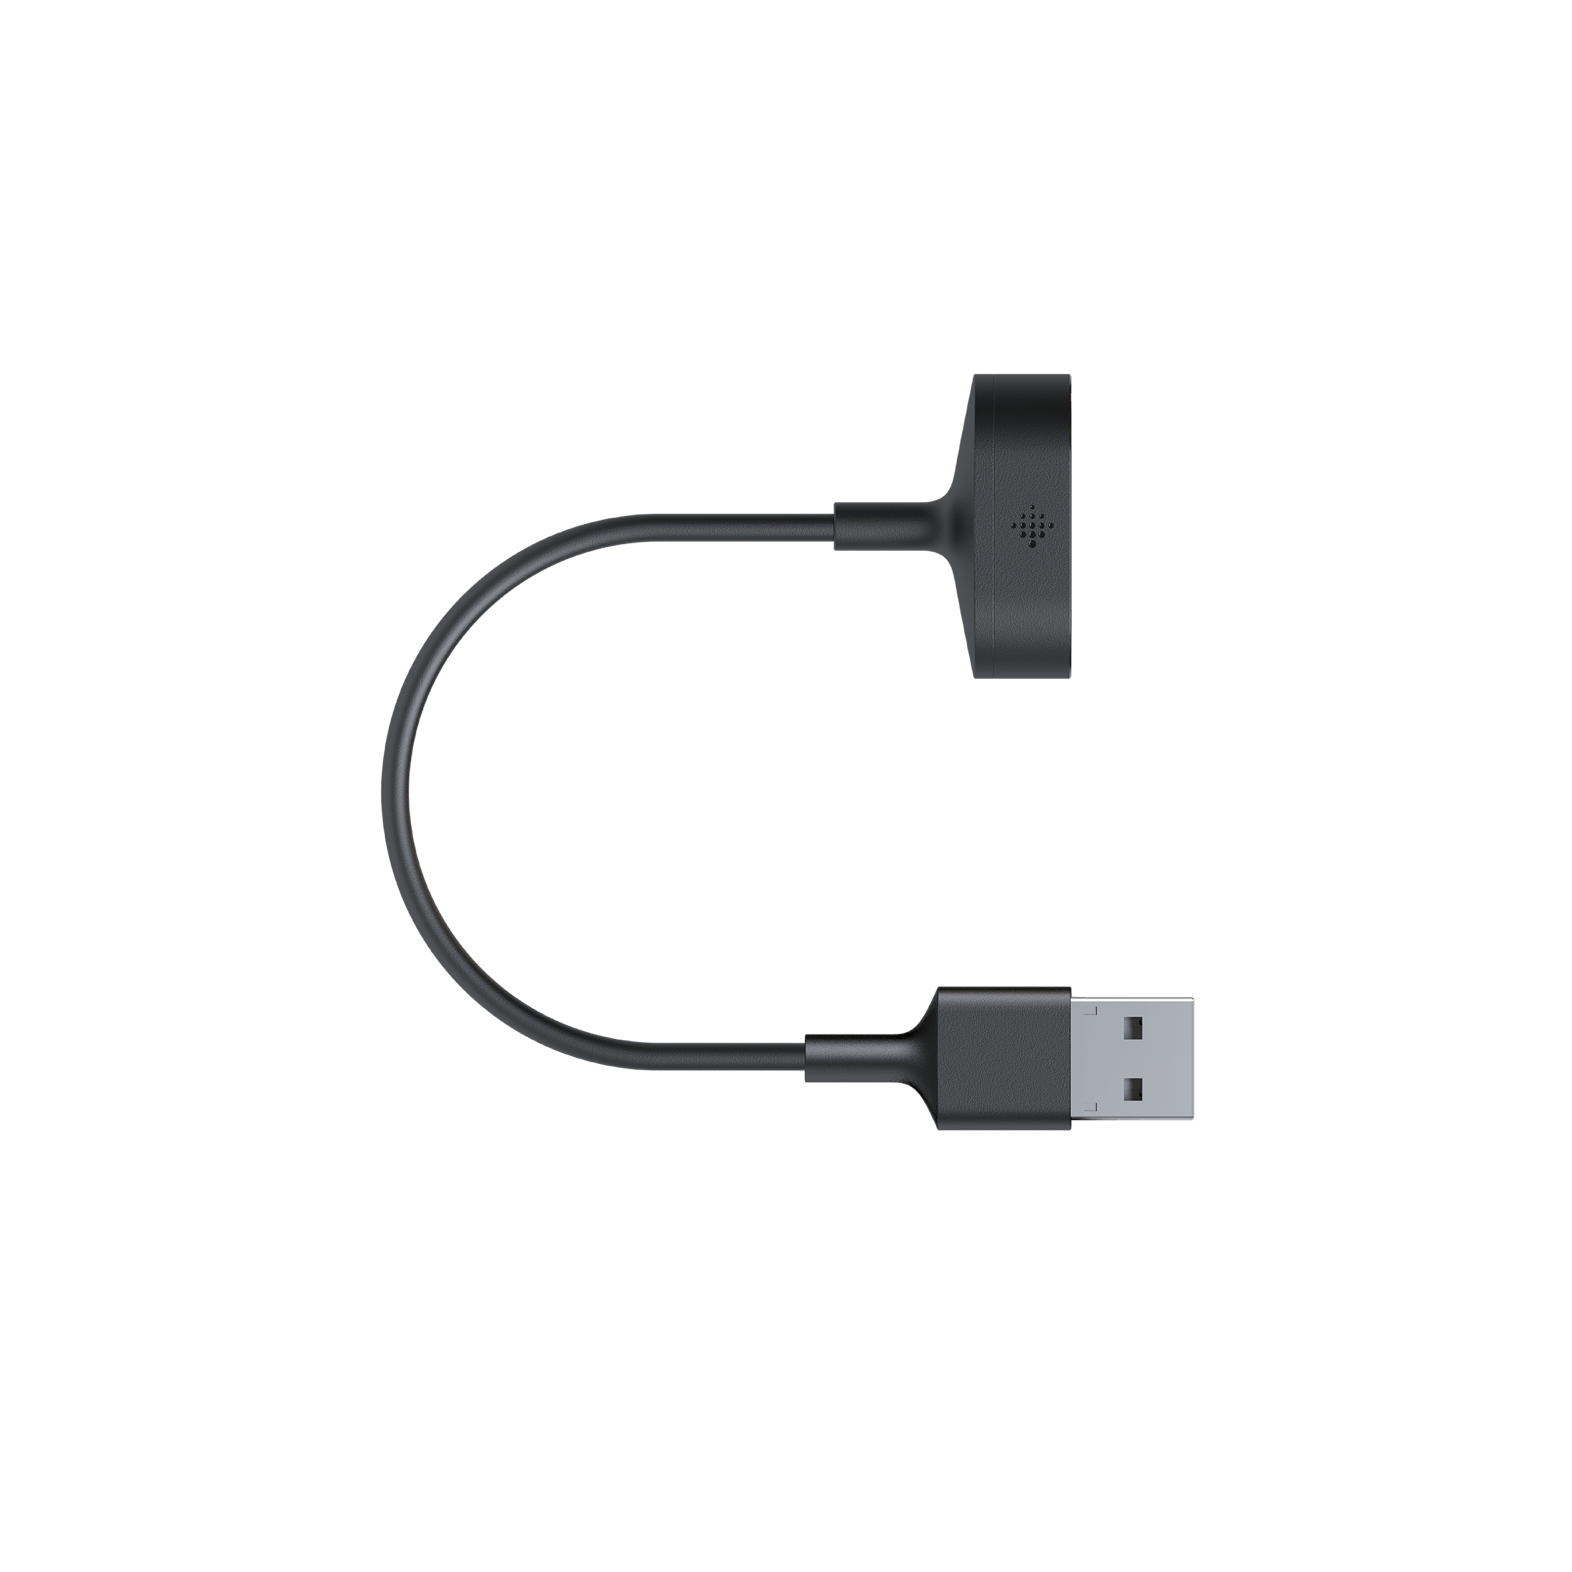 fitbit ace charger australia